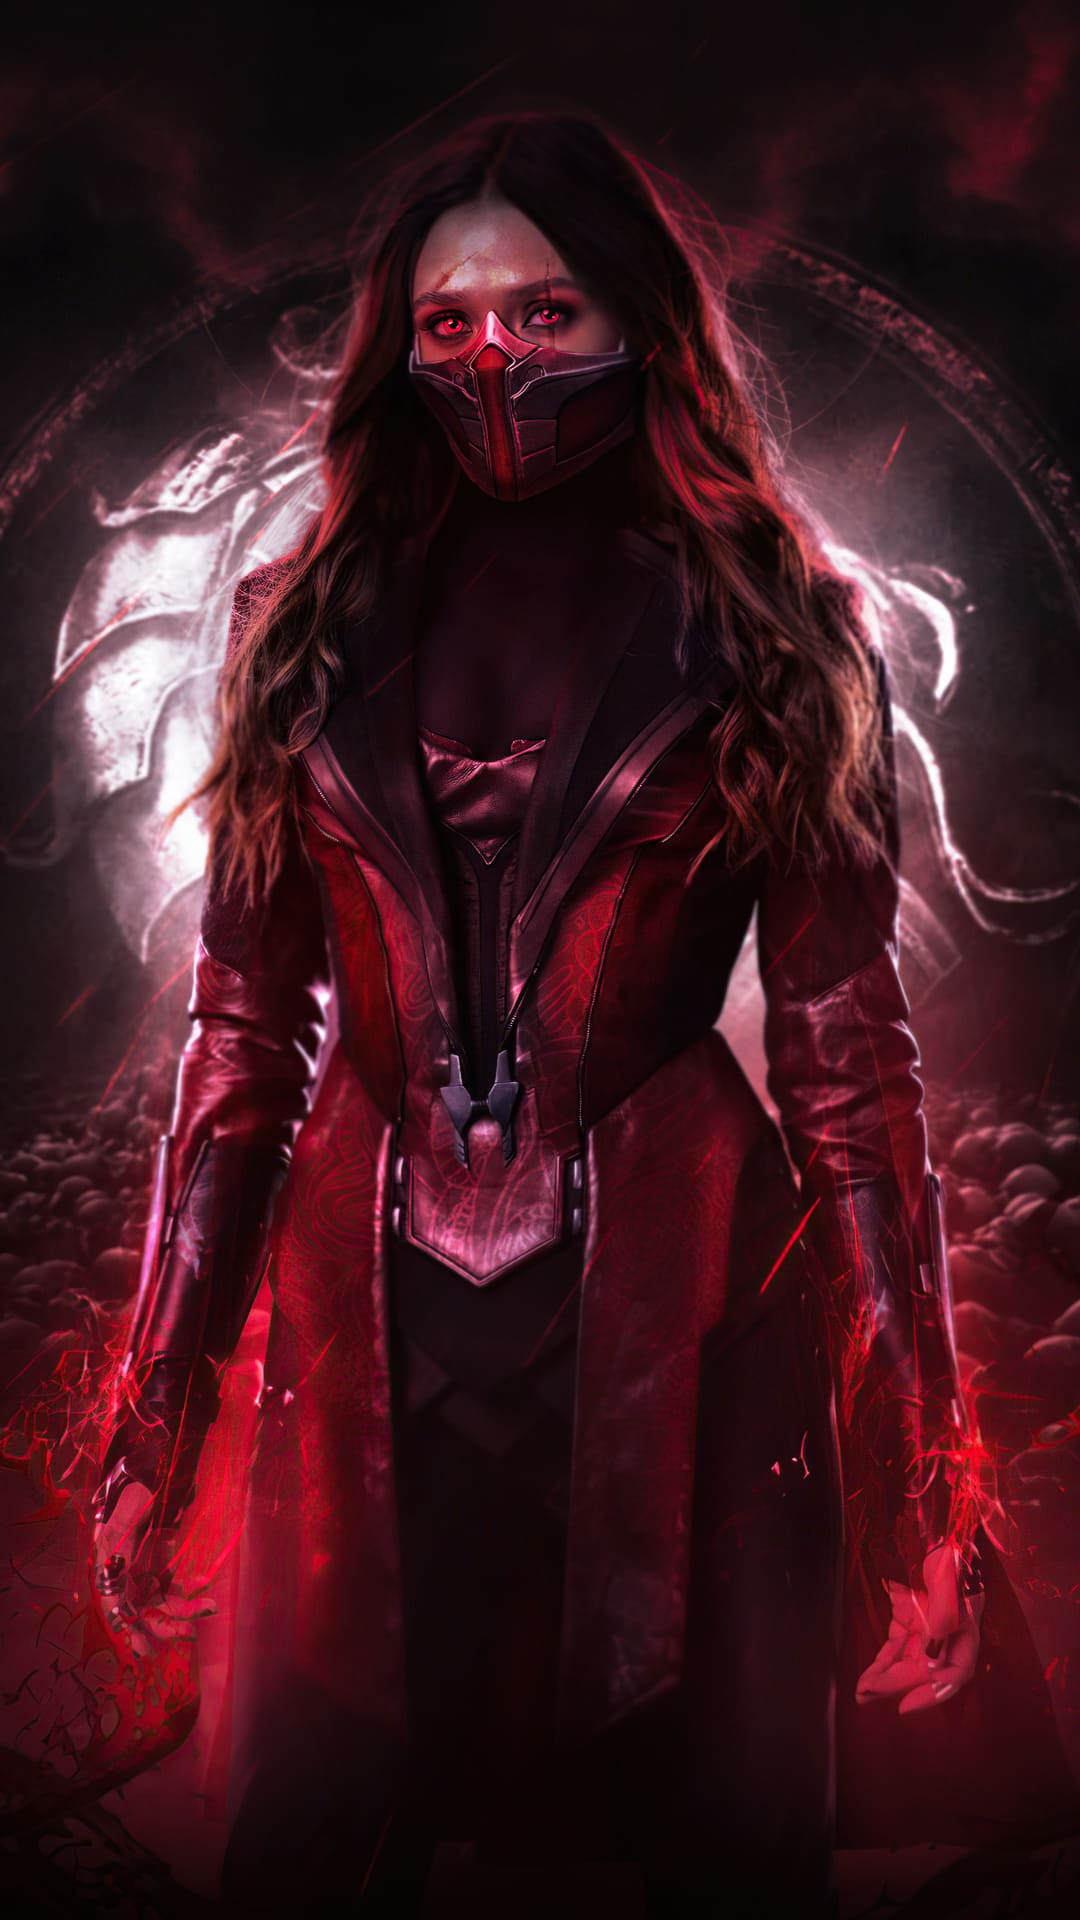 1080x1920 Scarlet Witch Wallpapers Top 35 Best Scarlet Witch Backgrounds Download